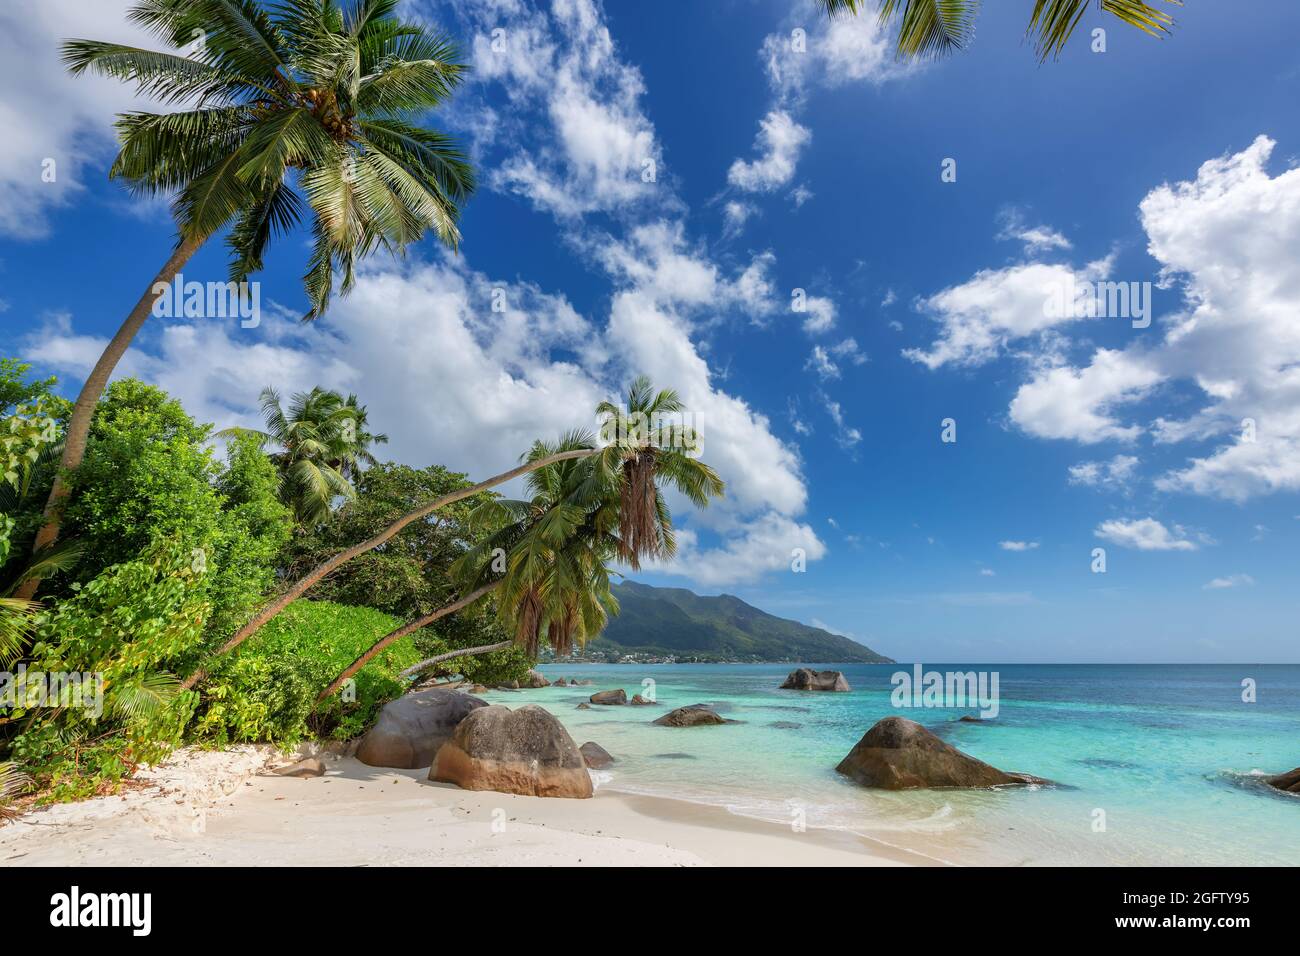 Paradise tropical beach with palms and turquoise sea Stock Photo